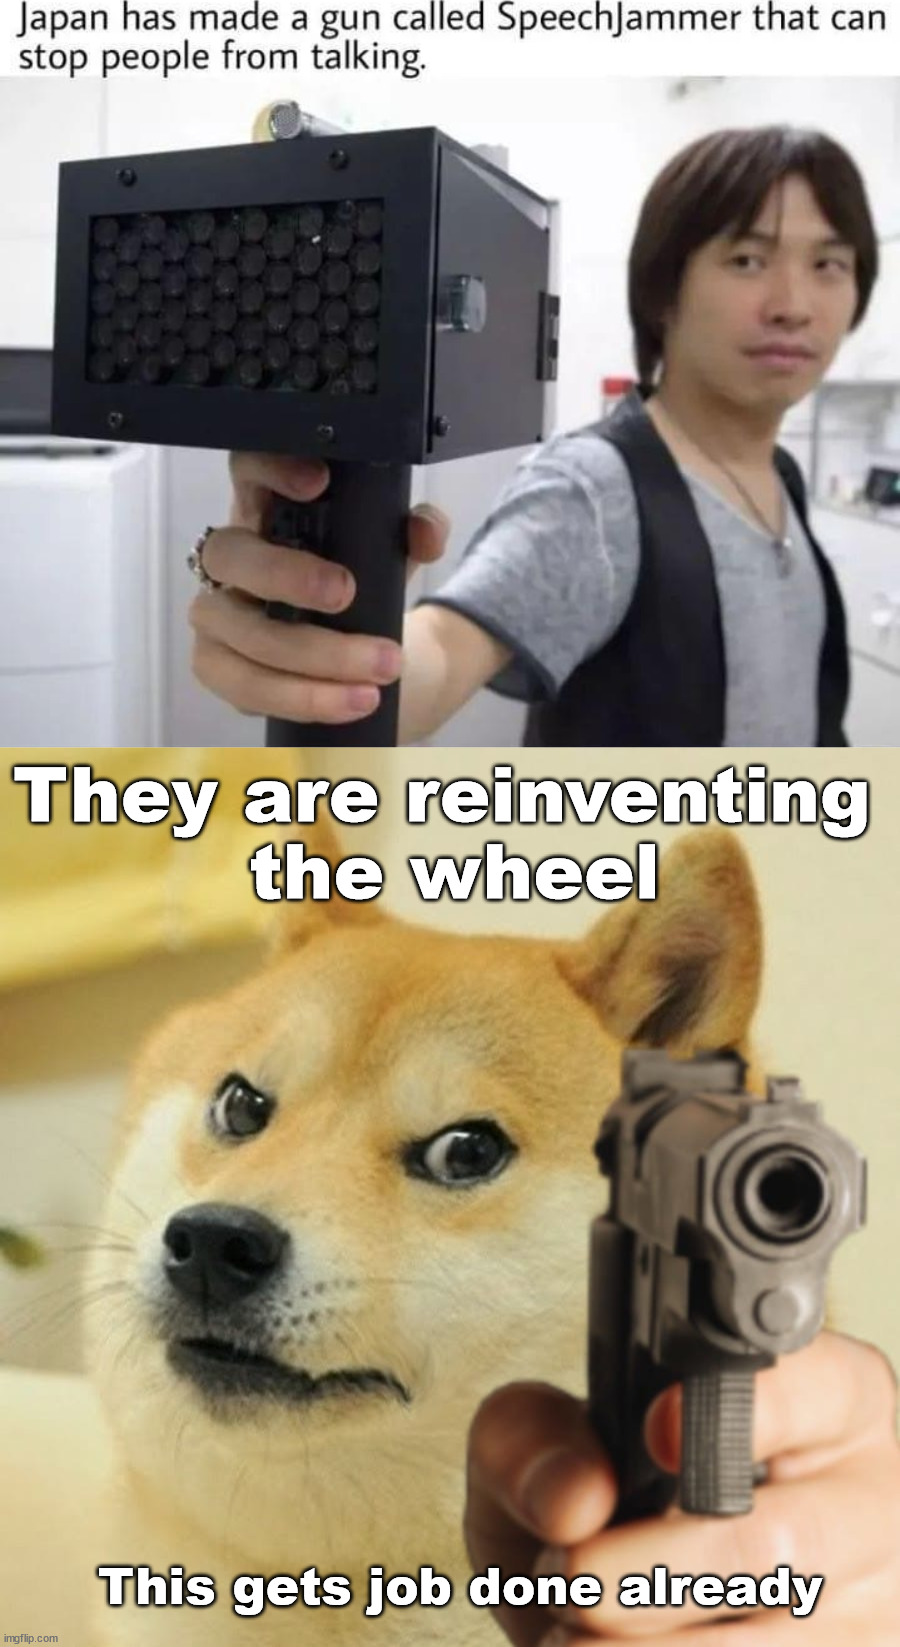 There already are ways to get people from talking | They are reinventing 
the wheel; This gets job done already | image tagged in doge holding a gun,speech,stop talking | made w/ Imgflip meme maker